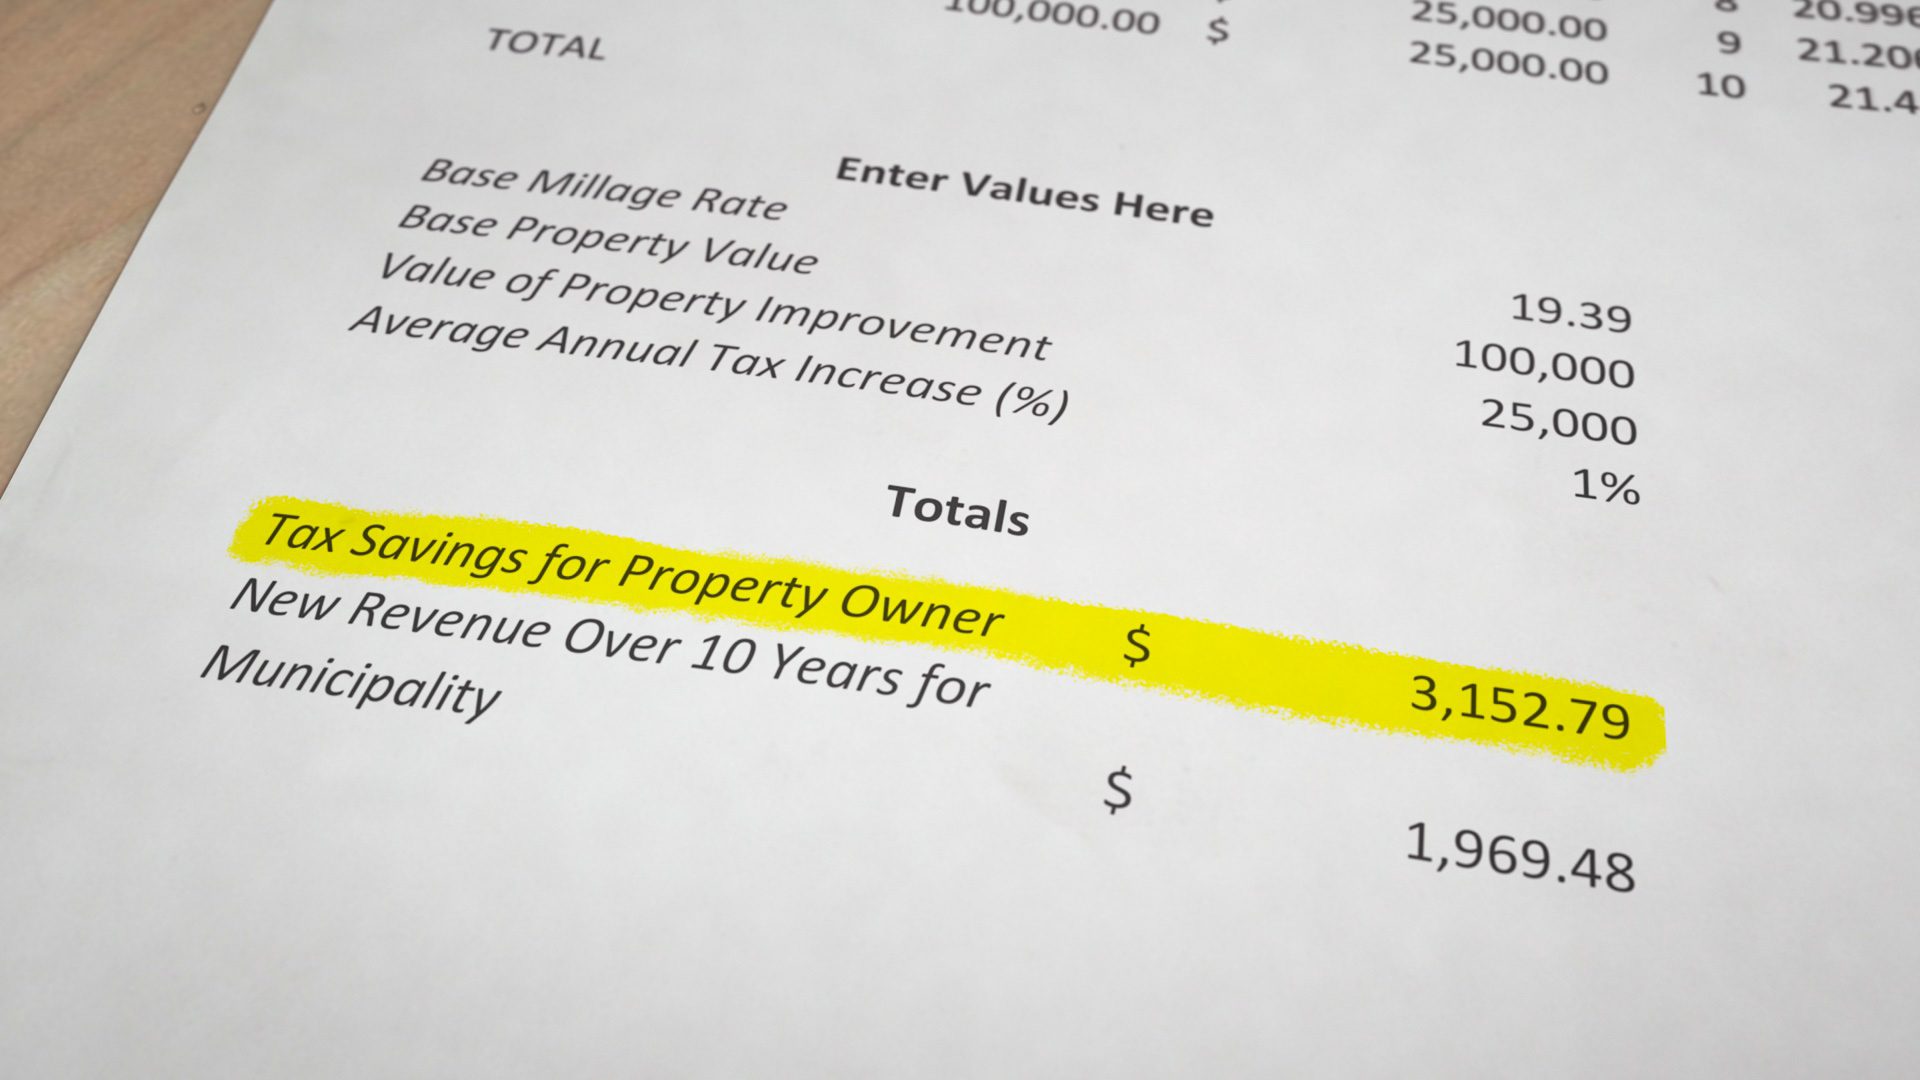 An example of how much a developer would save on property taxes over 10 years if making $25,000 in improvements on a $100,000 property in Gettysburg, Pa.